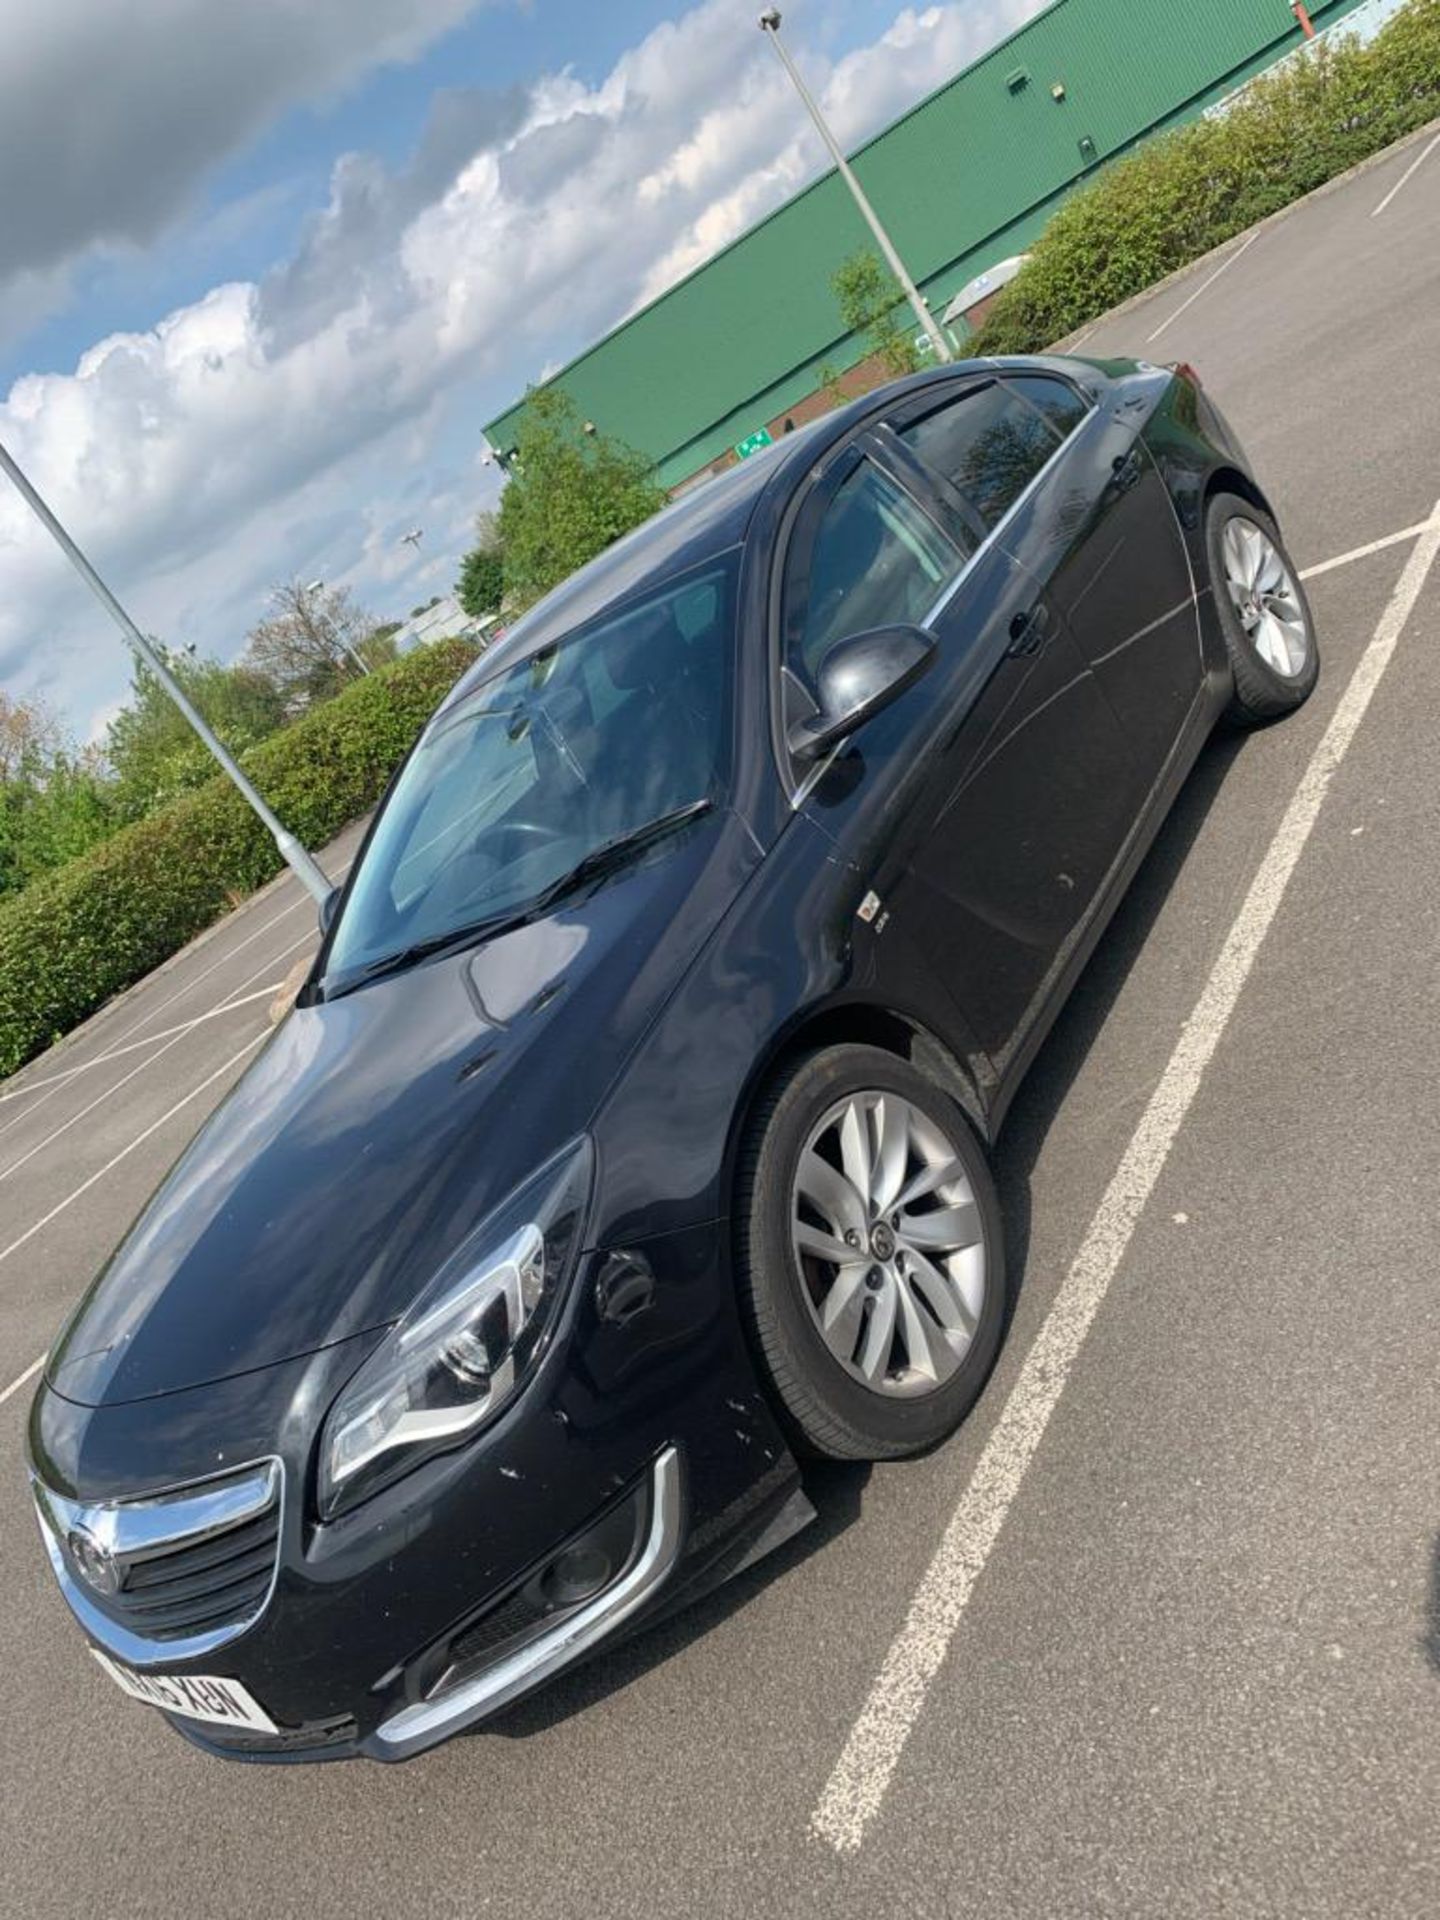 2016/16 REG VAUXHALL INSIGNIA SRI NAV CDTI S/S 1.6 DIESEL 5 DR HATCHBACK, SHOWING 2 FORMER KEEPERS - Image 4 of 12